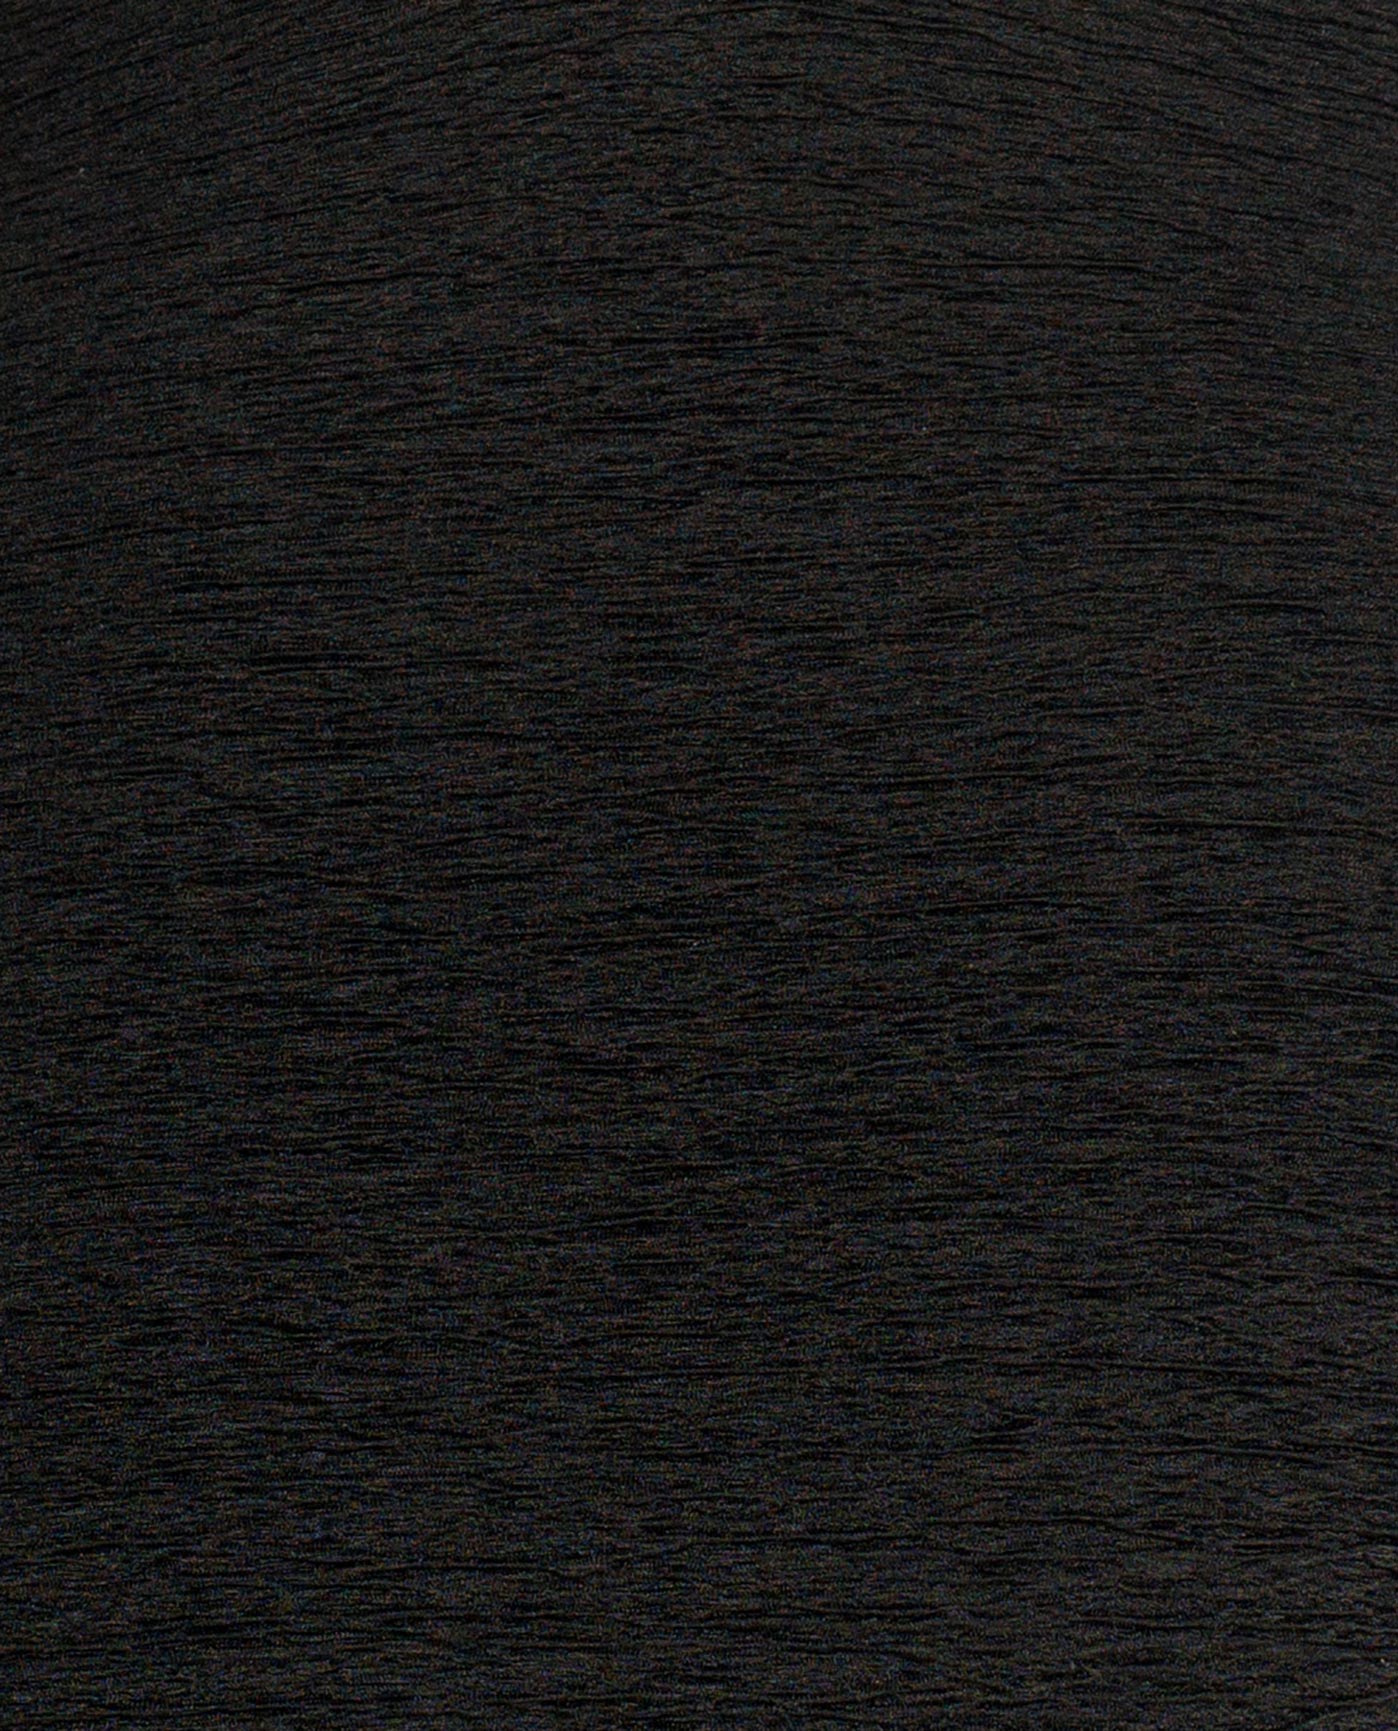 FABRIC SWATCH VIEW OF CHLORINE RESISTANT KRINKLE TEXTURED SOLID X-BACK ONE PIECE | KRINKLE BLACK 2023